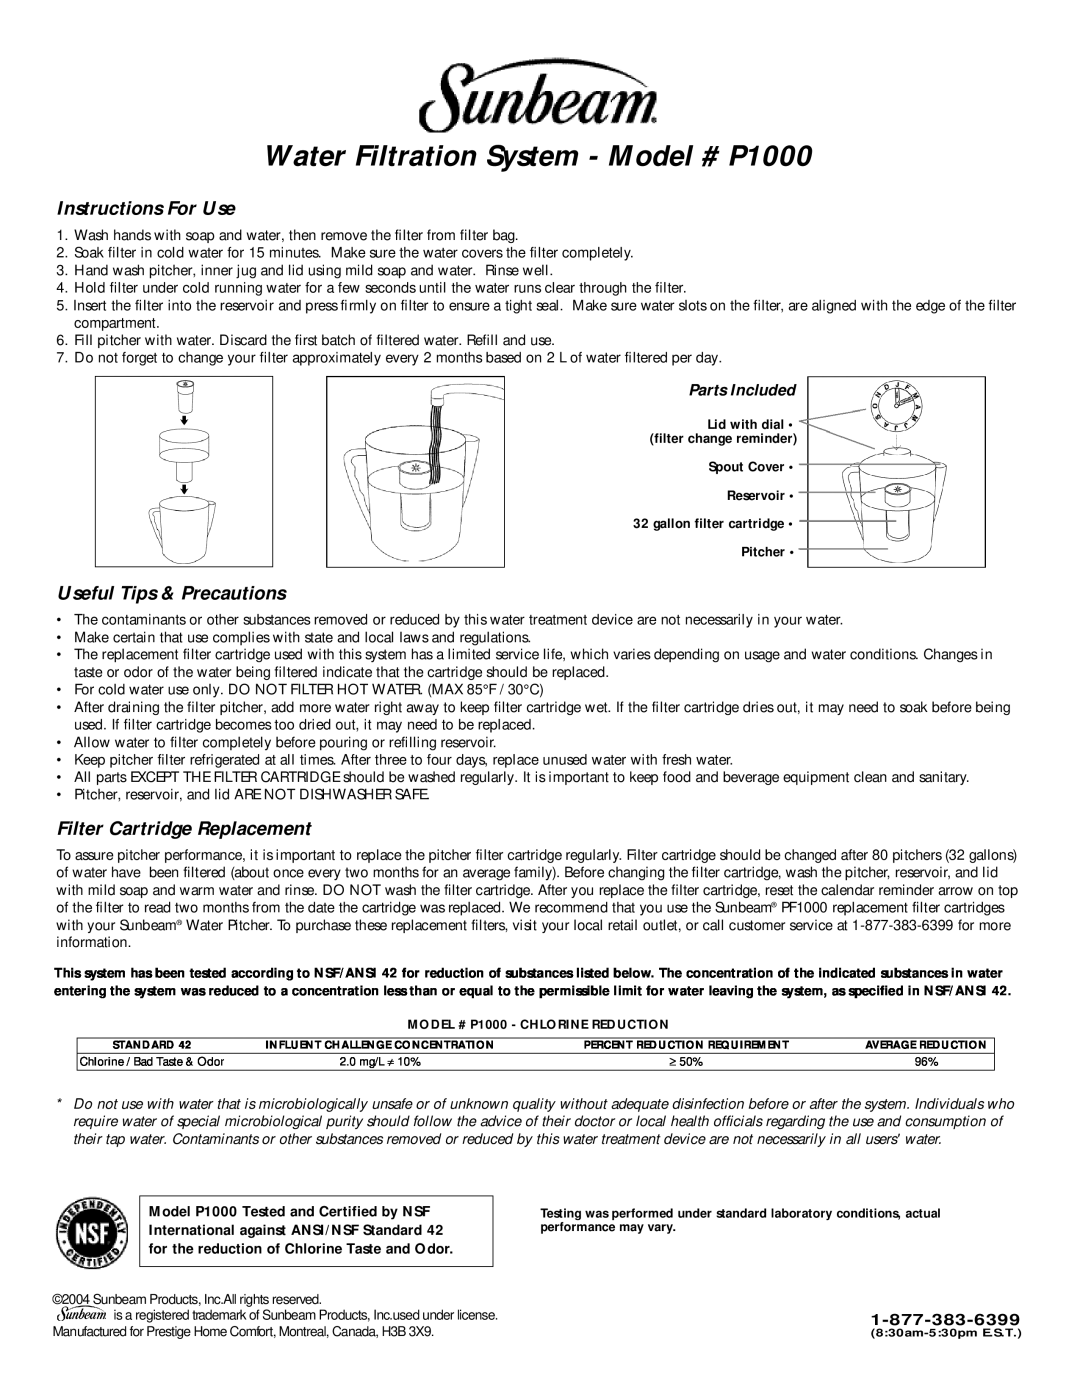 Sunbeam manual Water Filtration System - Model # P1000, Instructions For Use, Useful Tips & Precautions, Parts Included 